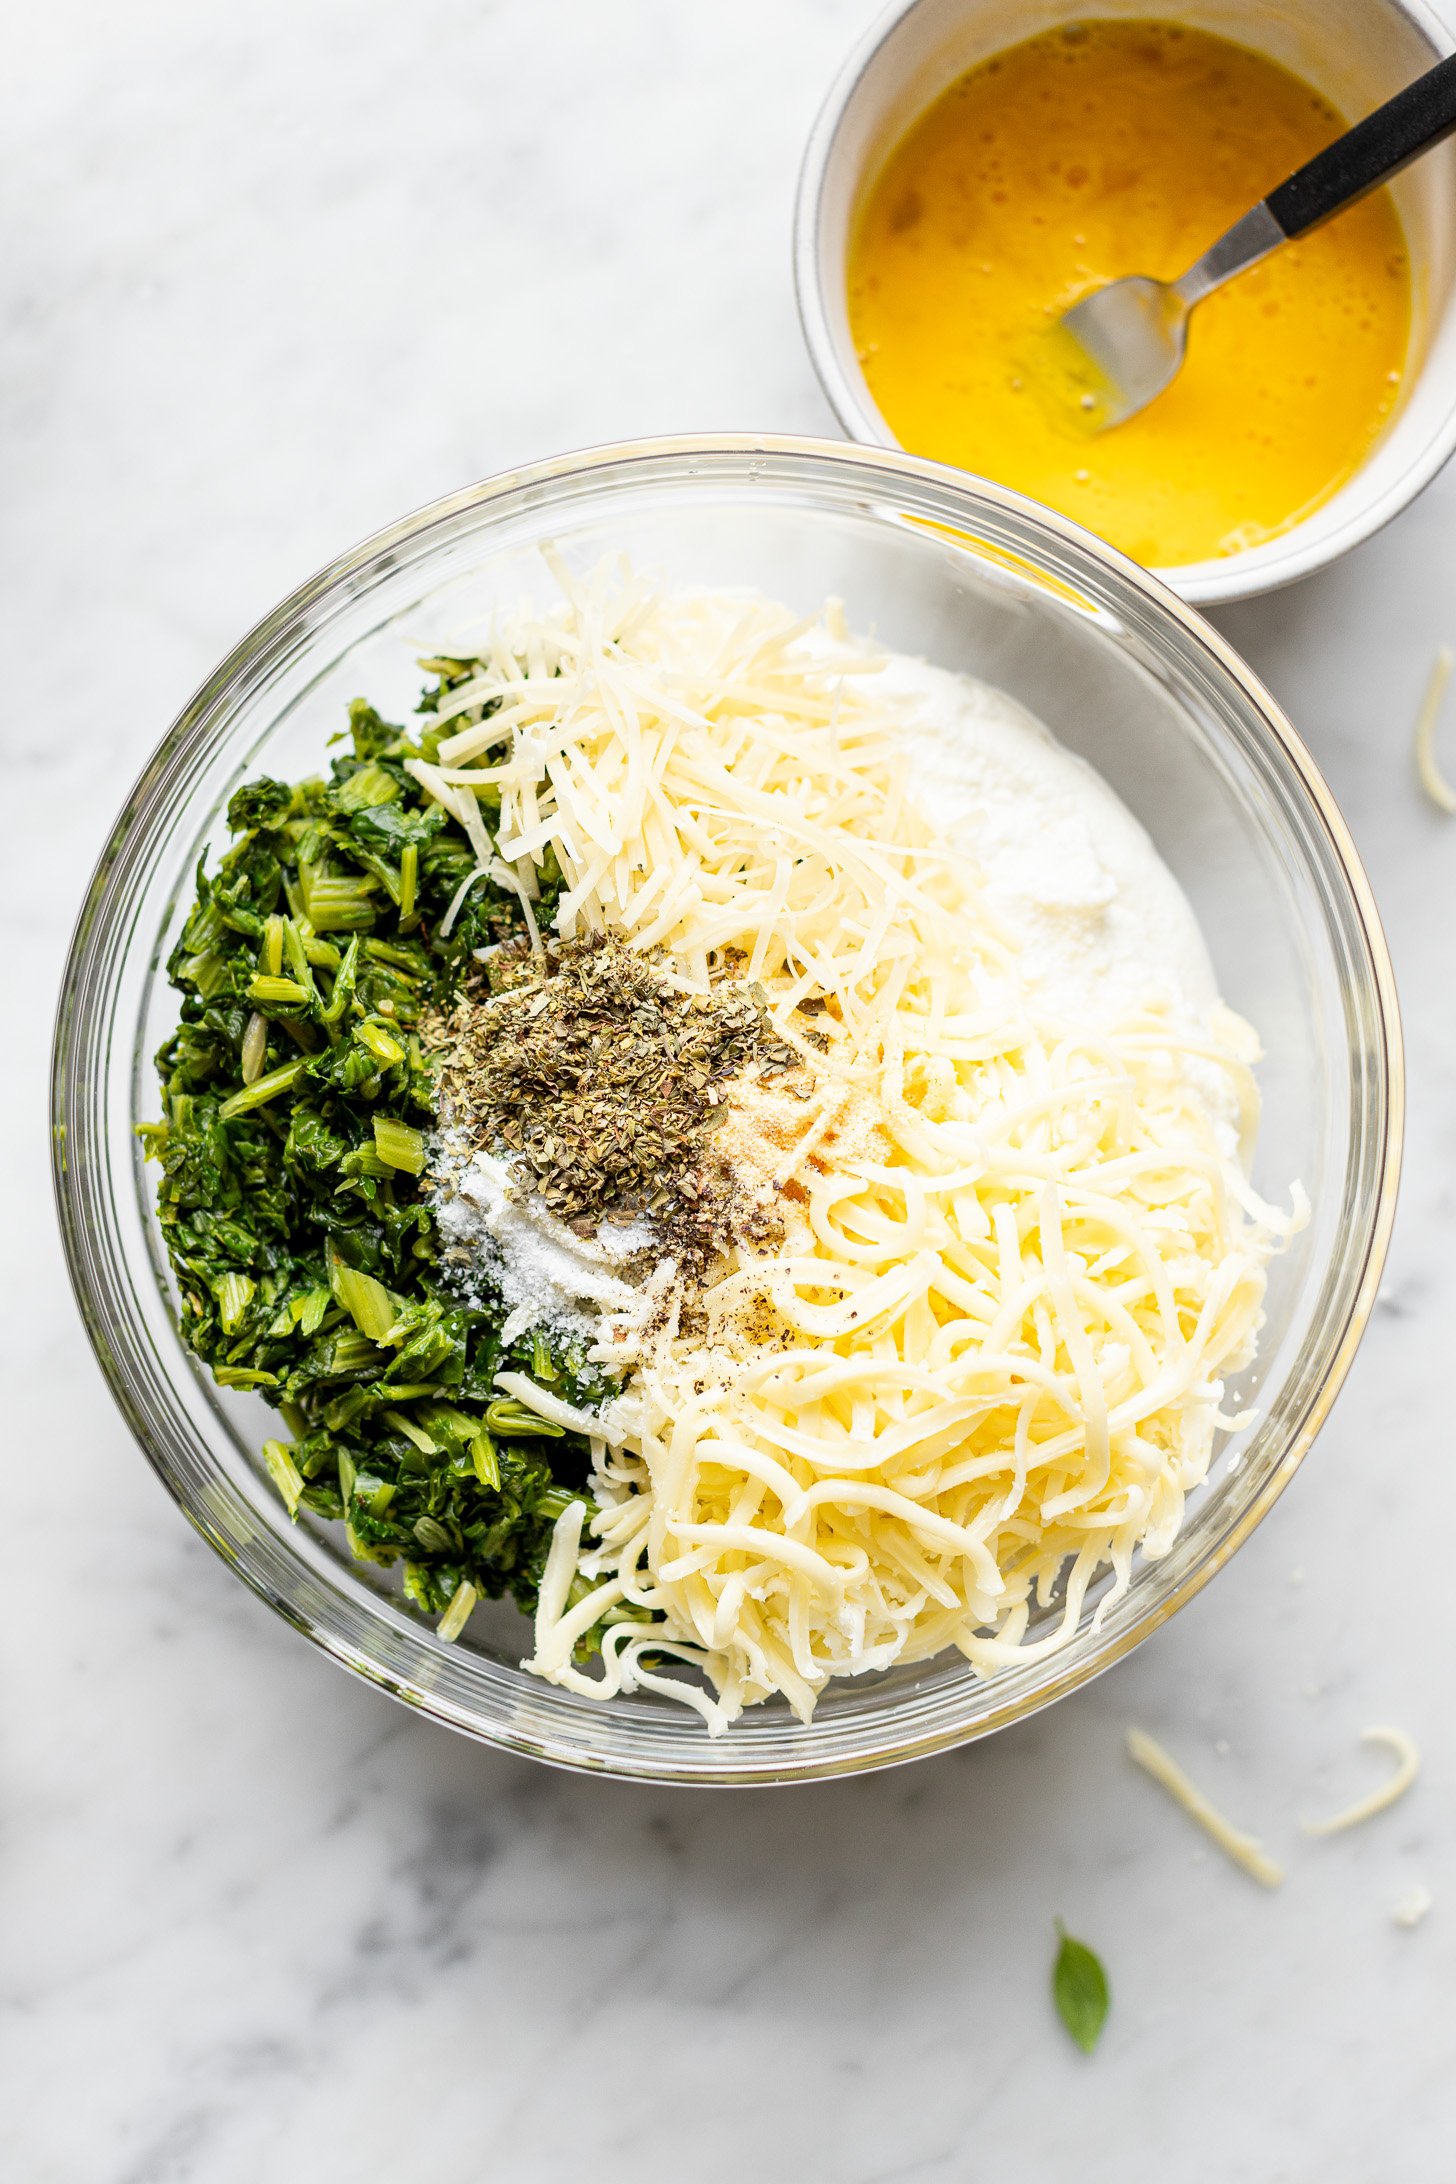 A glass bowl filled with spinach, ricotta, mozzarella cheese, parmesan, garlic powder, Italian seasoning, salt and pepper. There is also a white bowl filled with beaten egg and a fork in the bowl. Both bowls are sitting on a white counter.